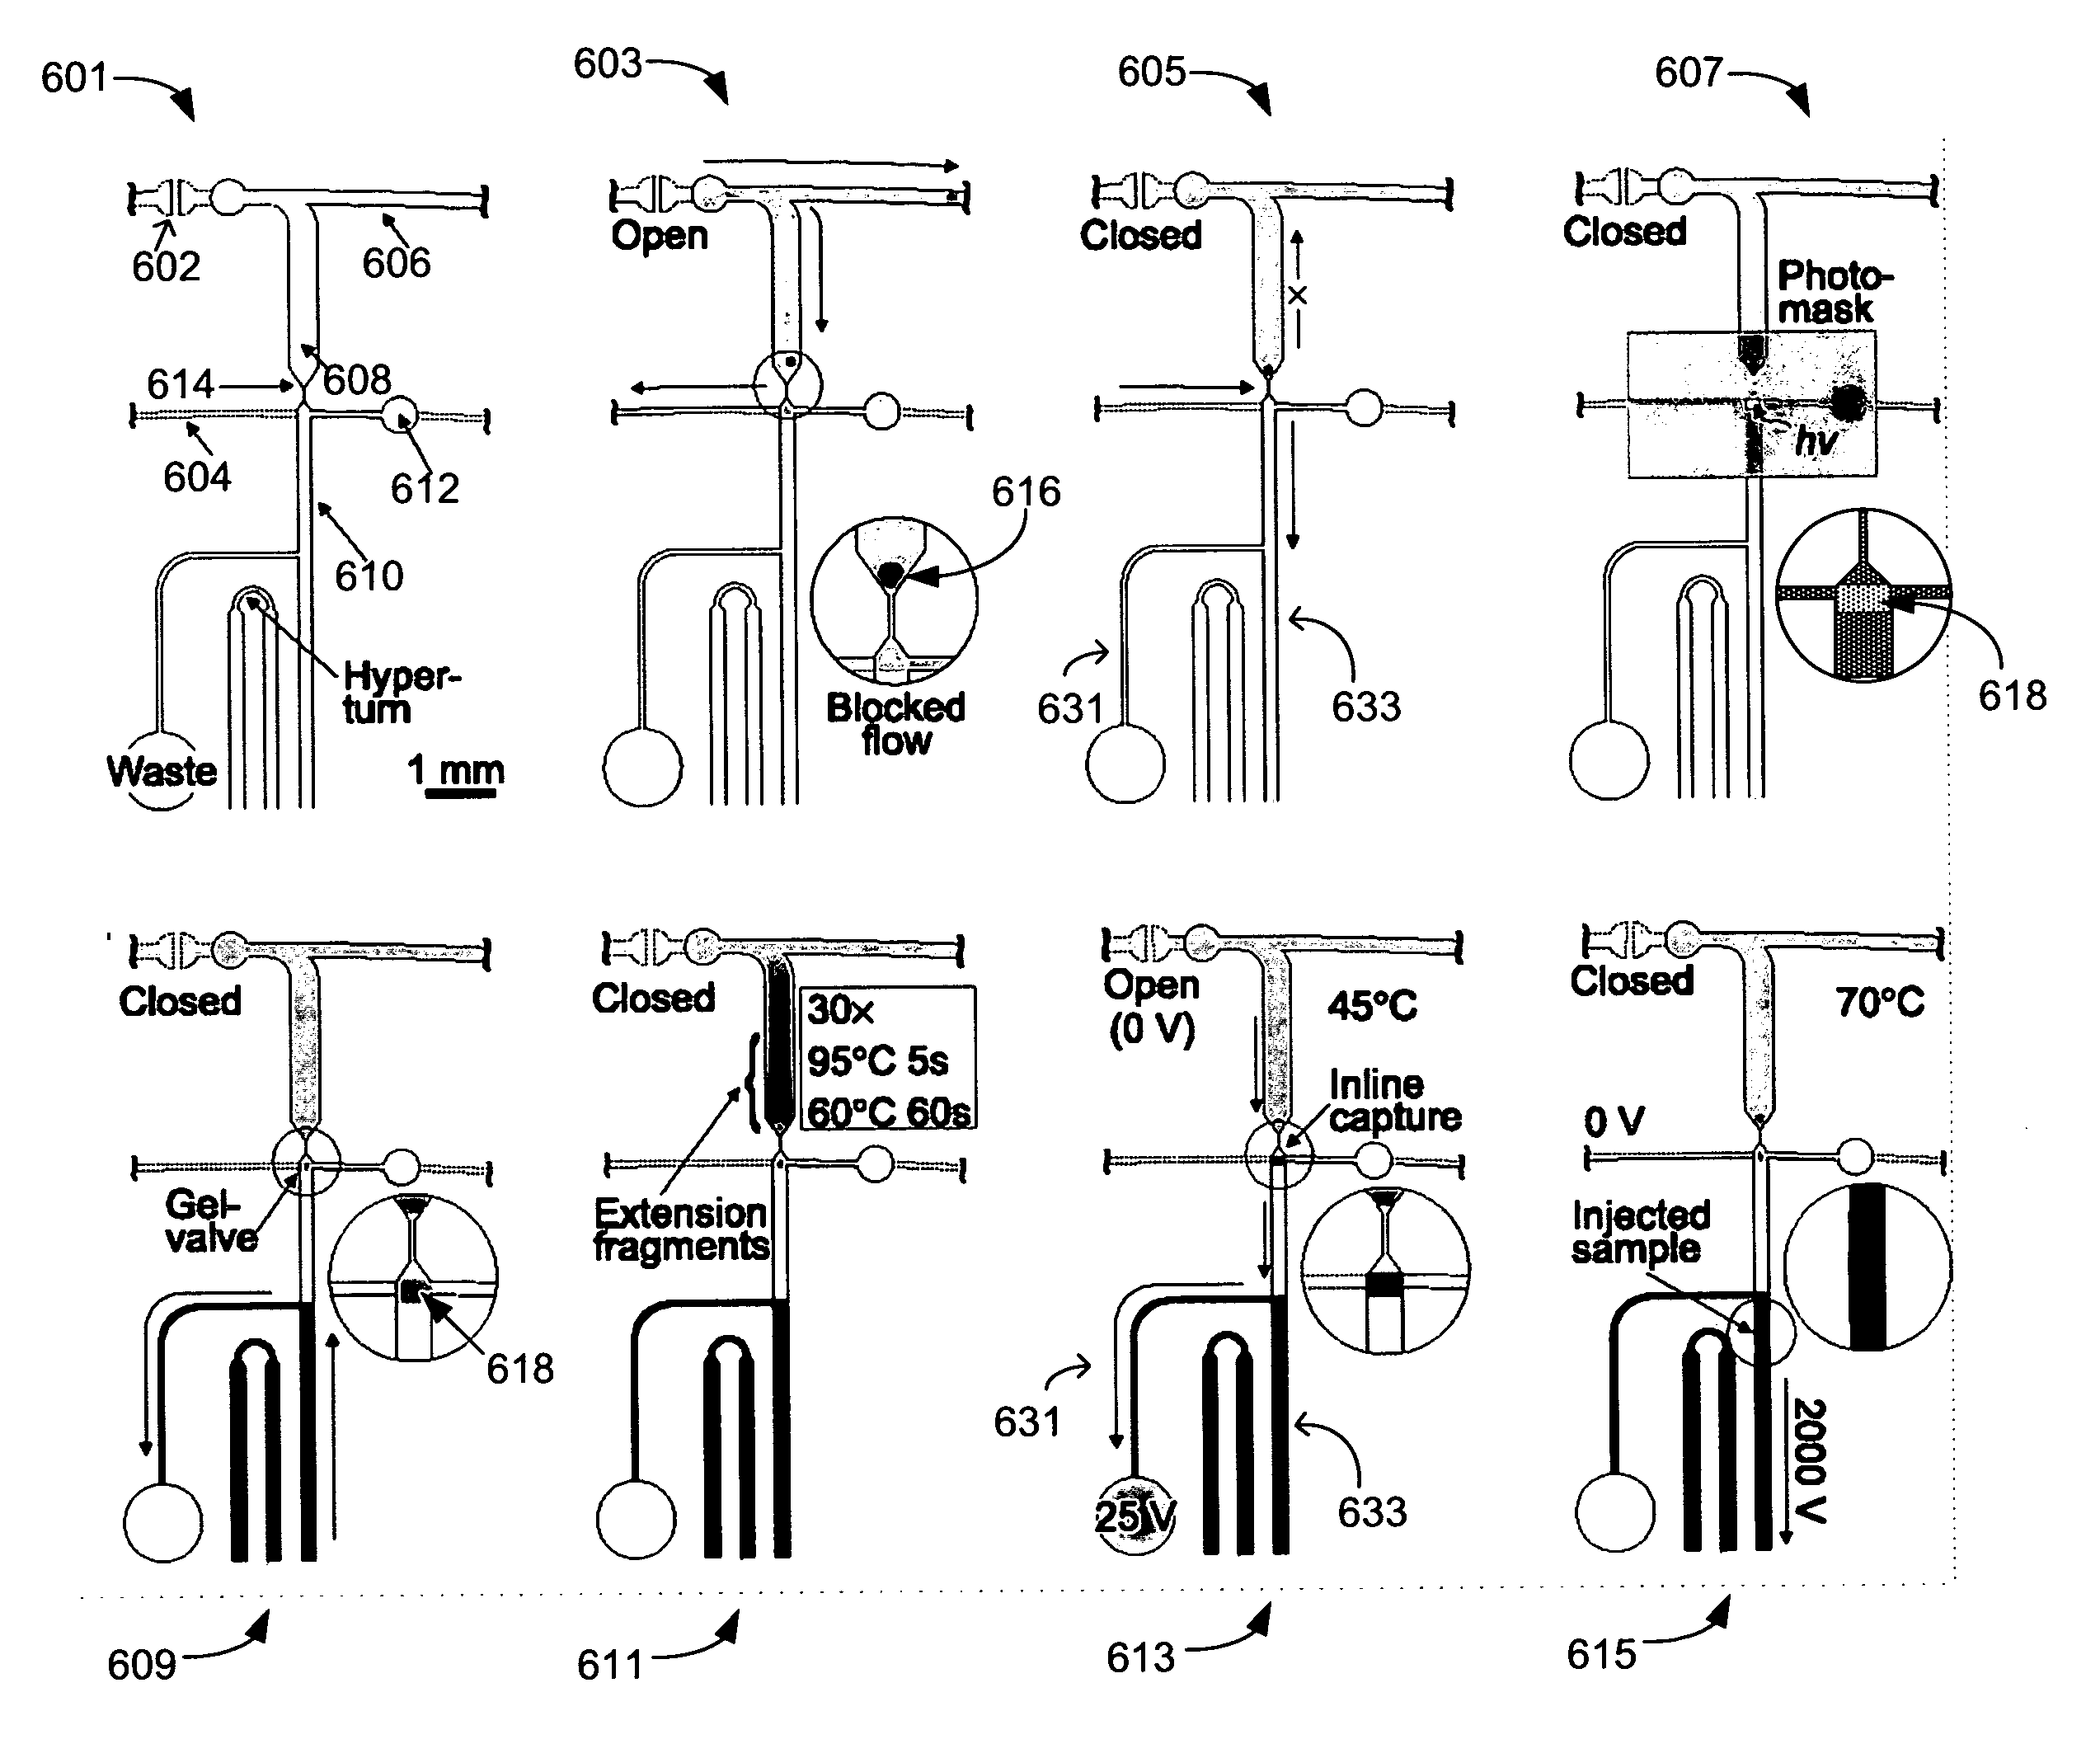 Inline-injection microdevice and microfabricated integrated DNA analysis system using same